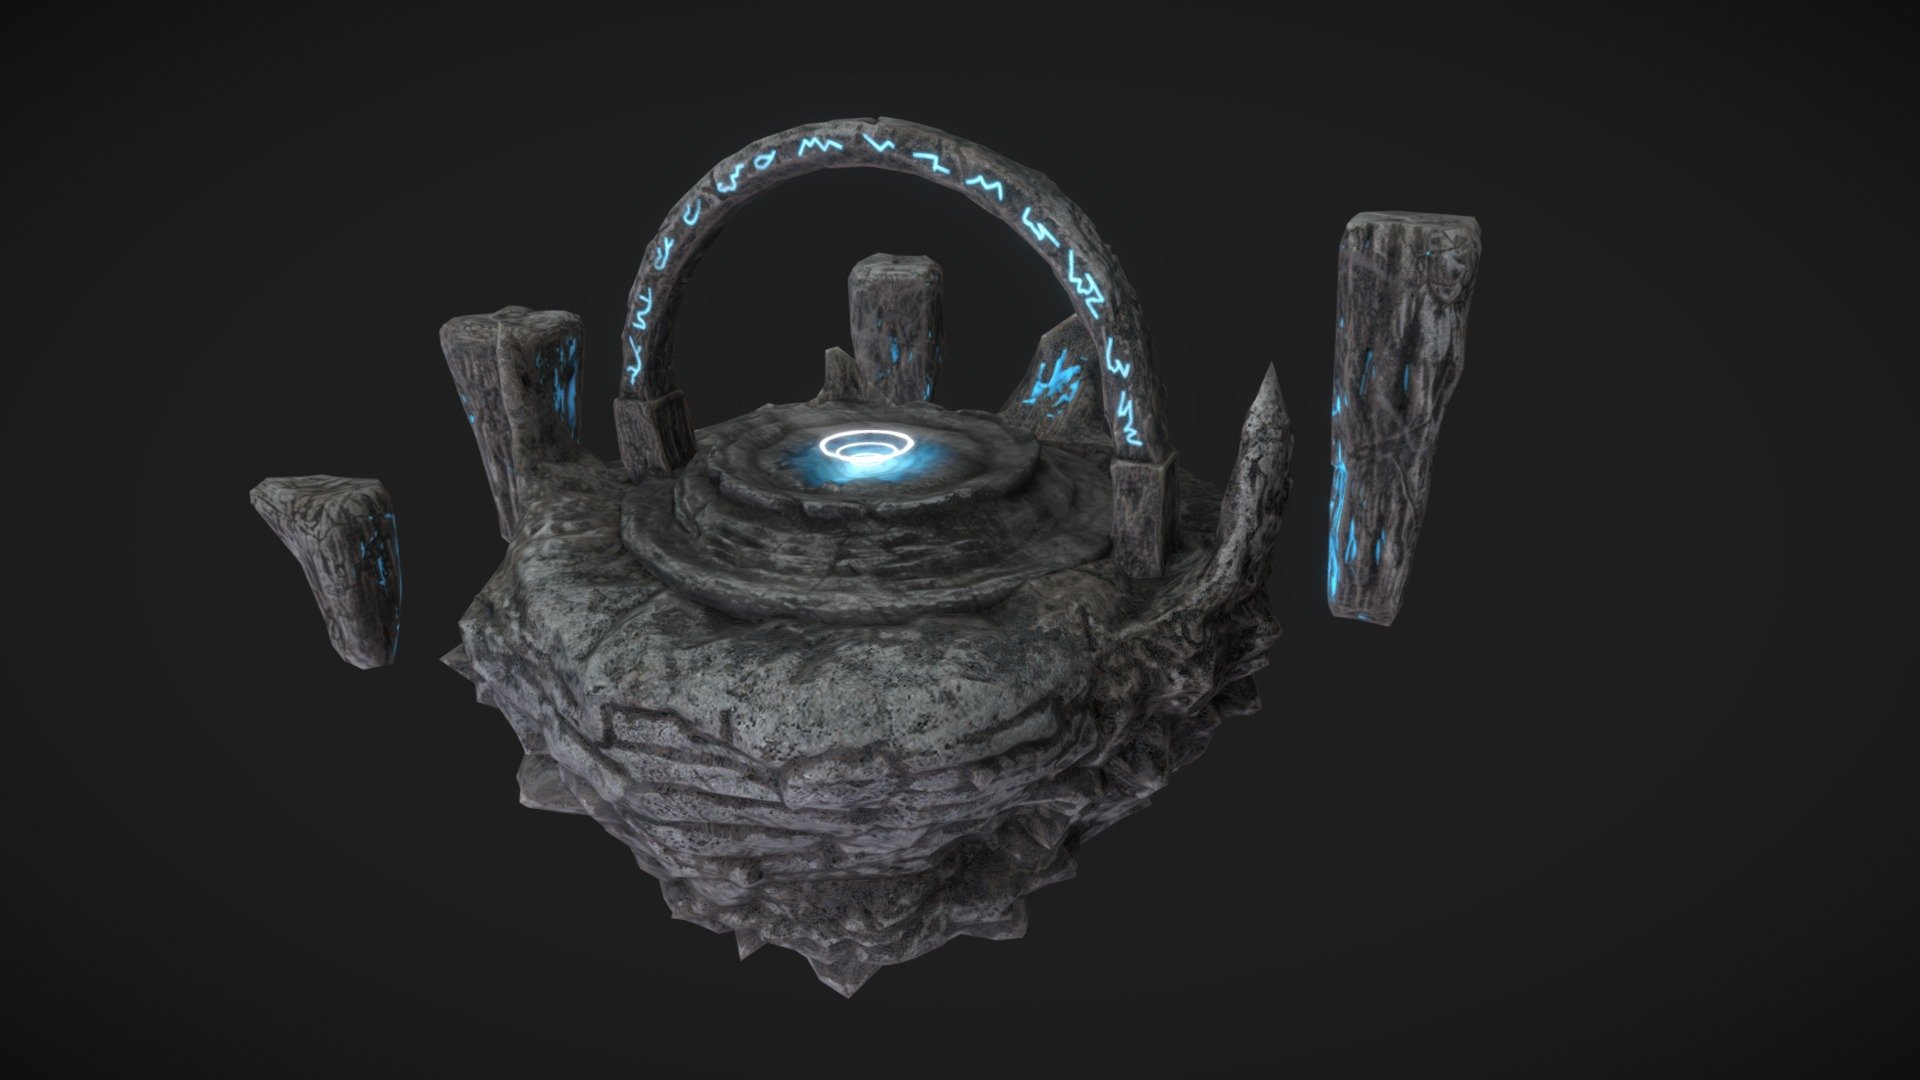 Portal for games ready.
Sci Fi 3D Model.
For Fantasy Projects or Games.
Low poly 3d model.
PBR materials.
Textures in 4K 3d model